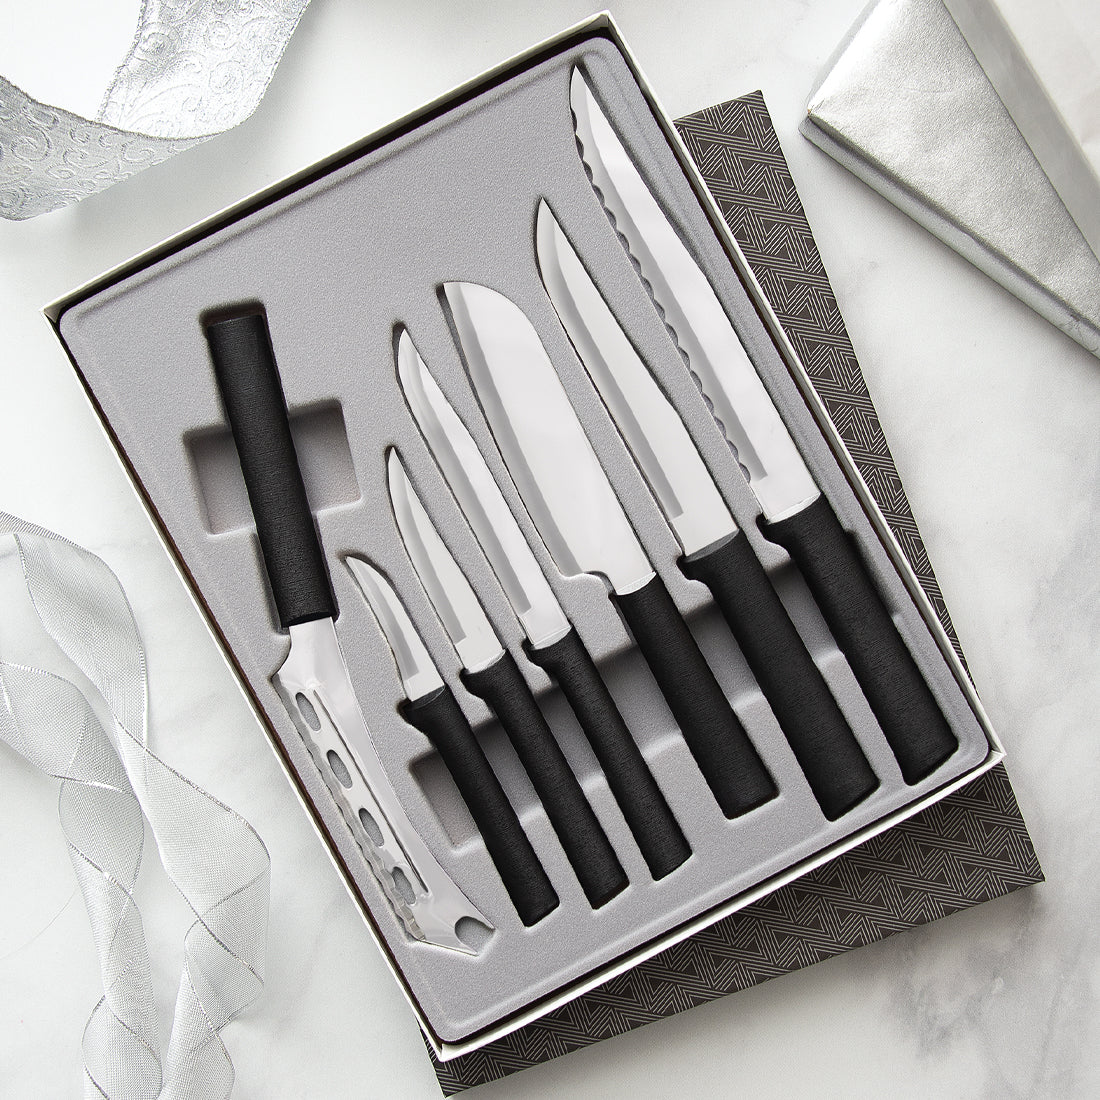 Black handled Starter Gift Set (Part 2) in a gift box on a white background with silver table decorations.